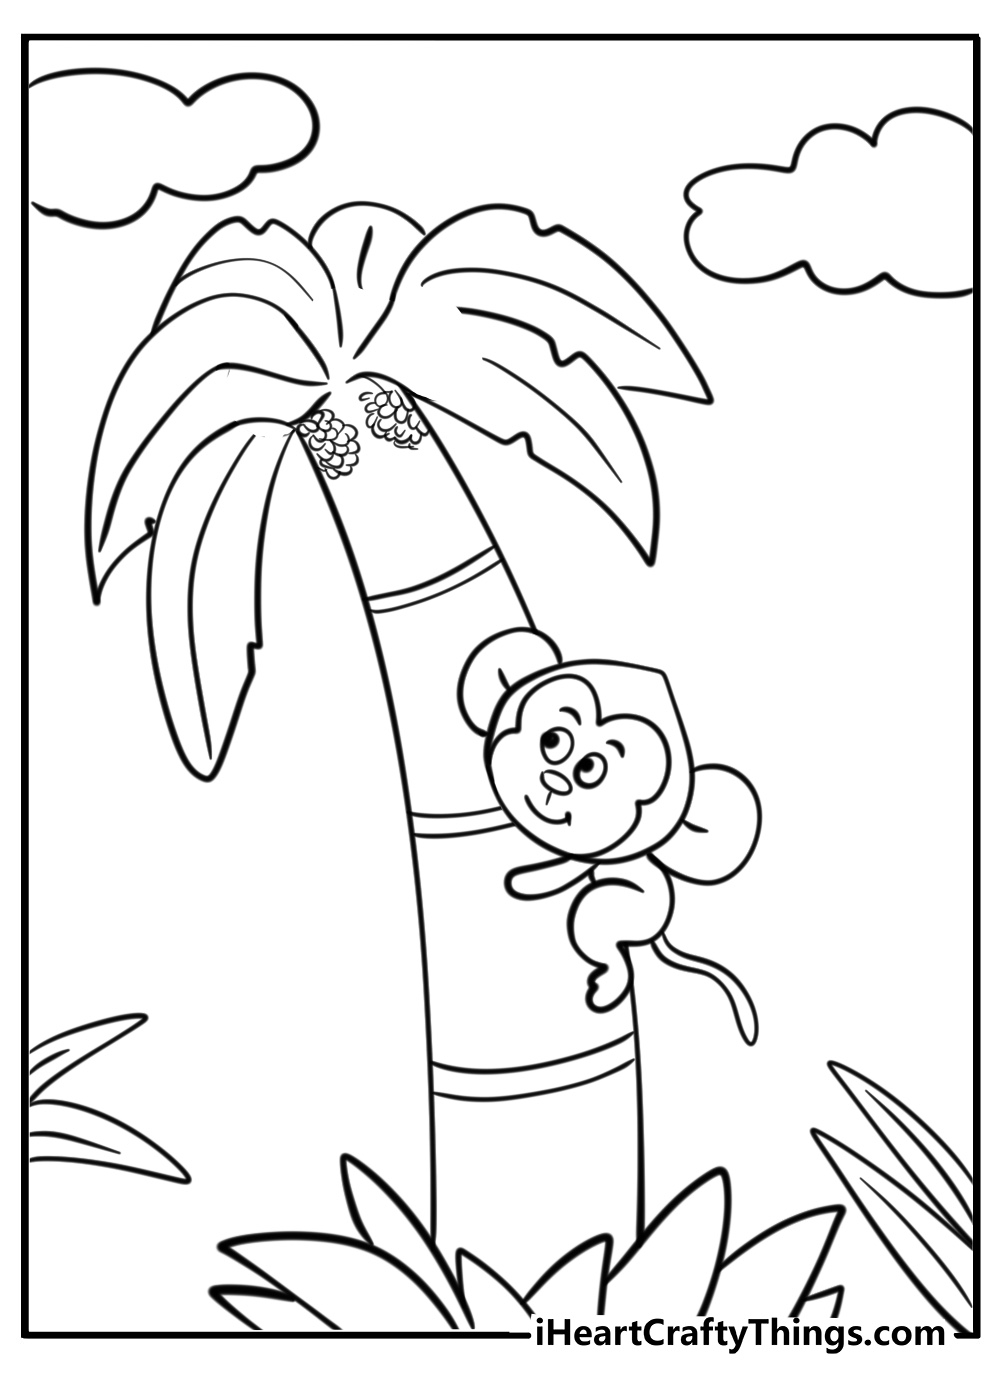 Palm tree with a monkey printable